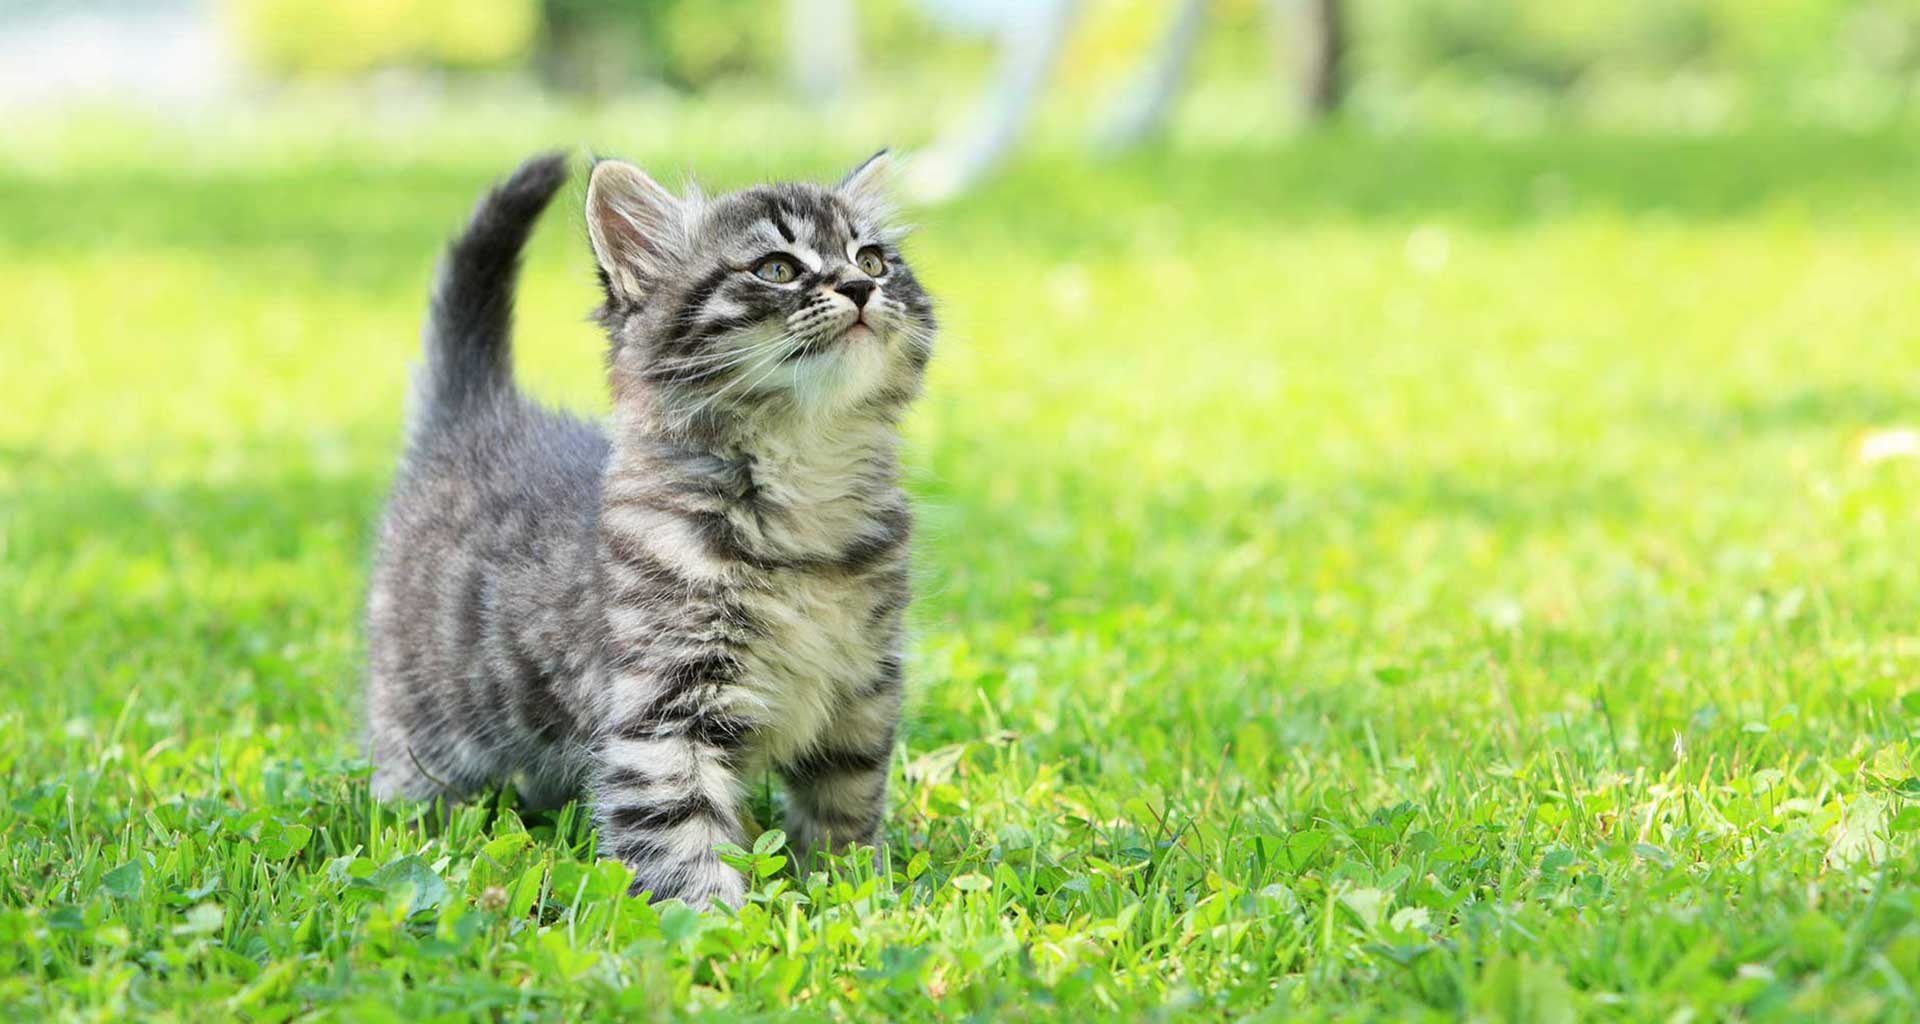 5 tips to protect your cat in spring